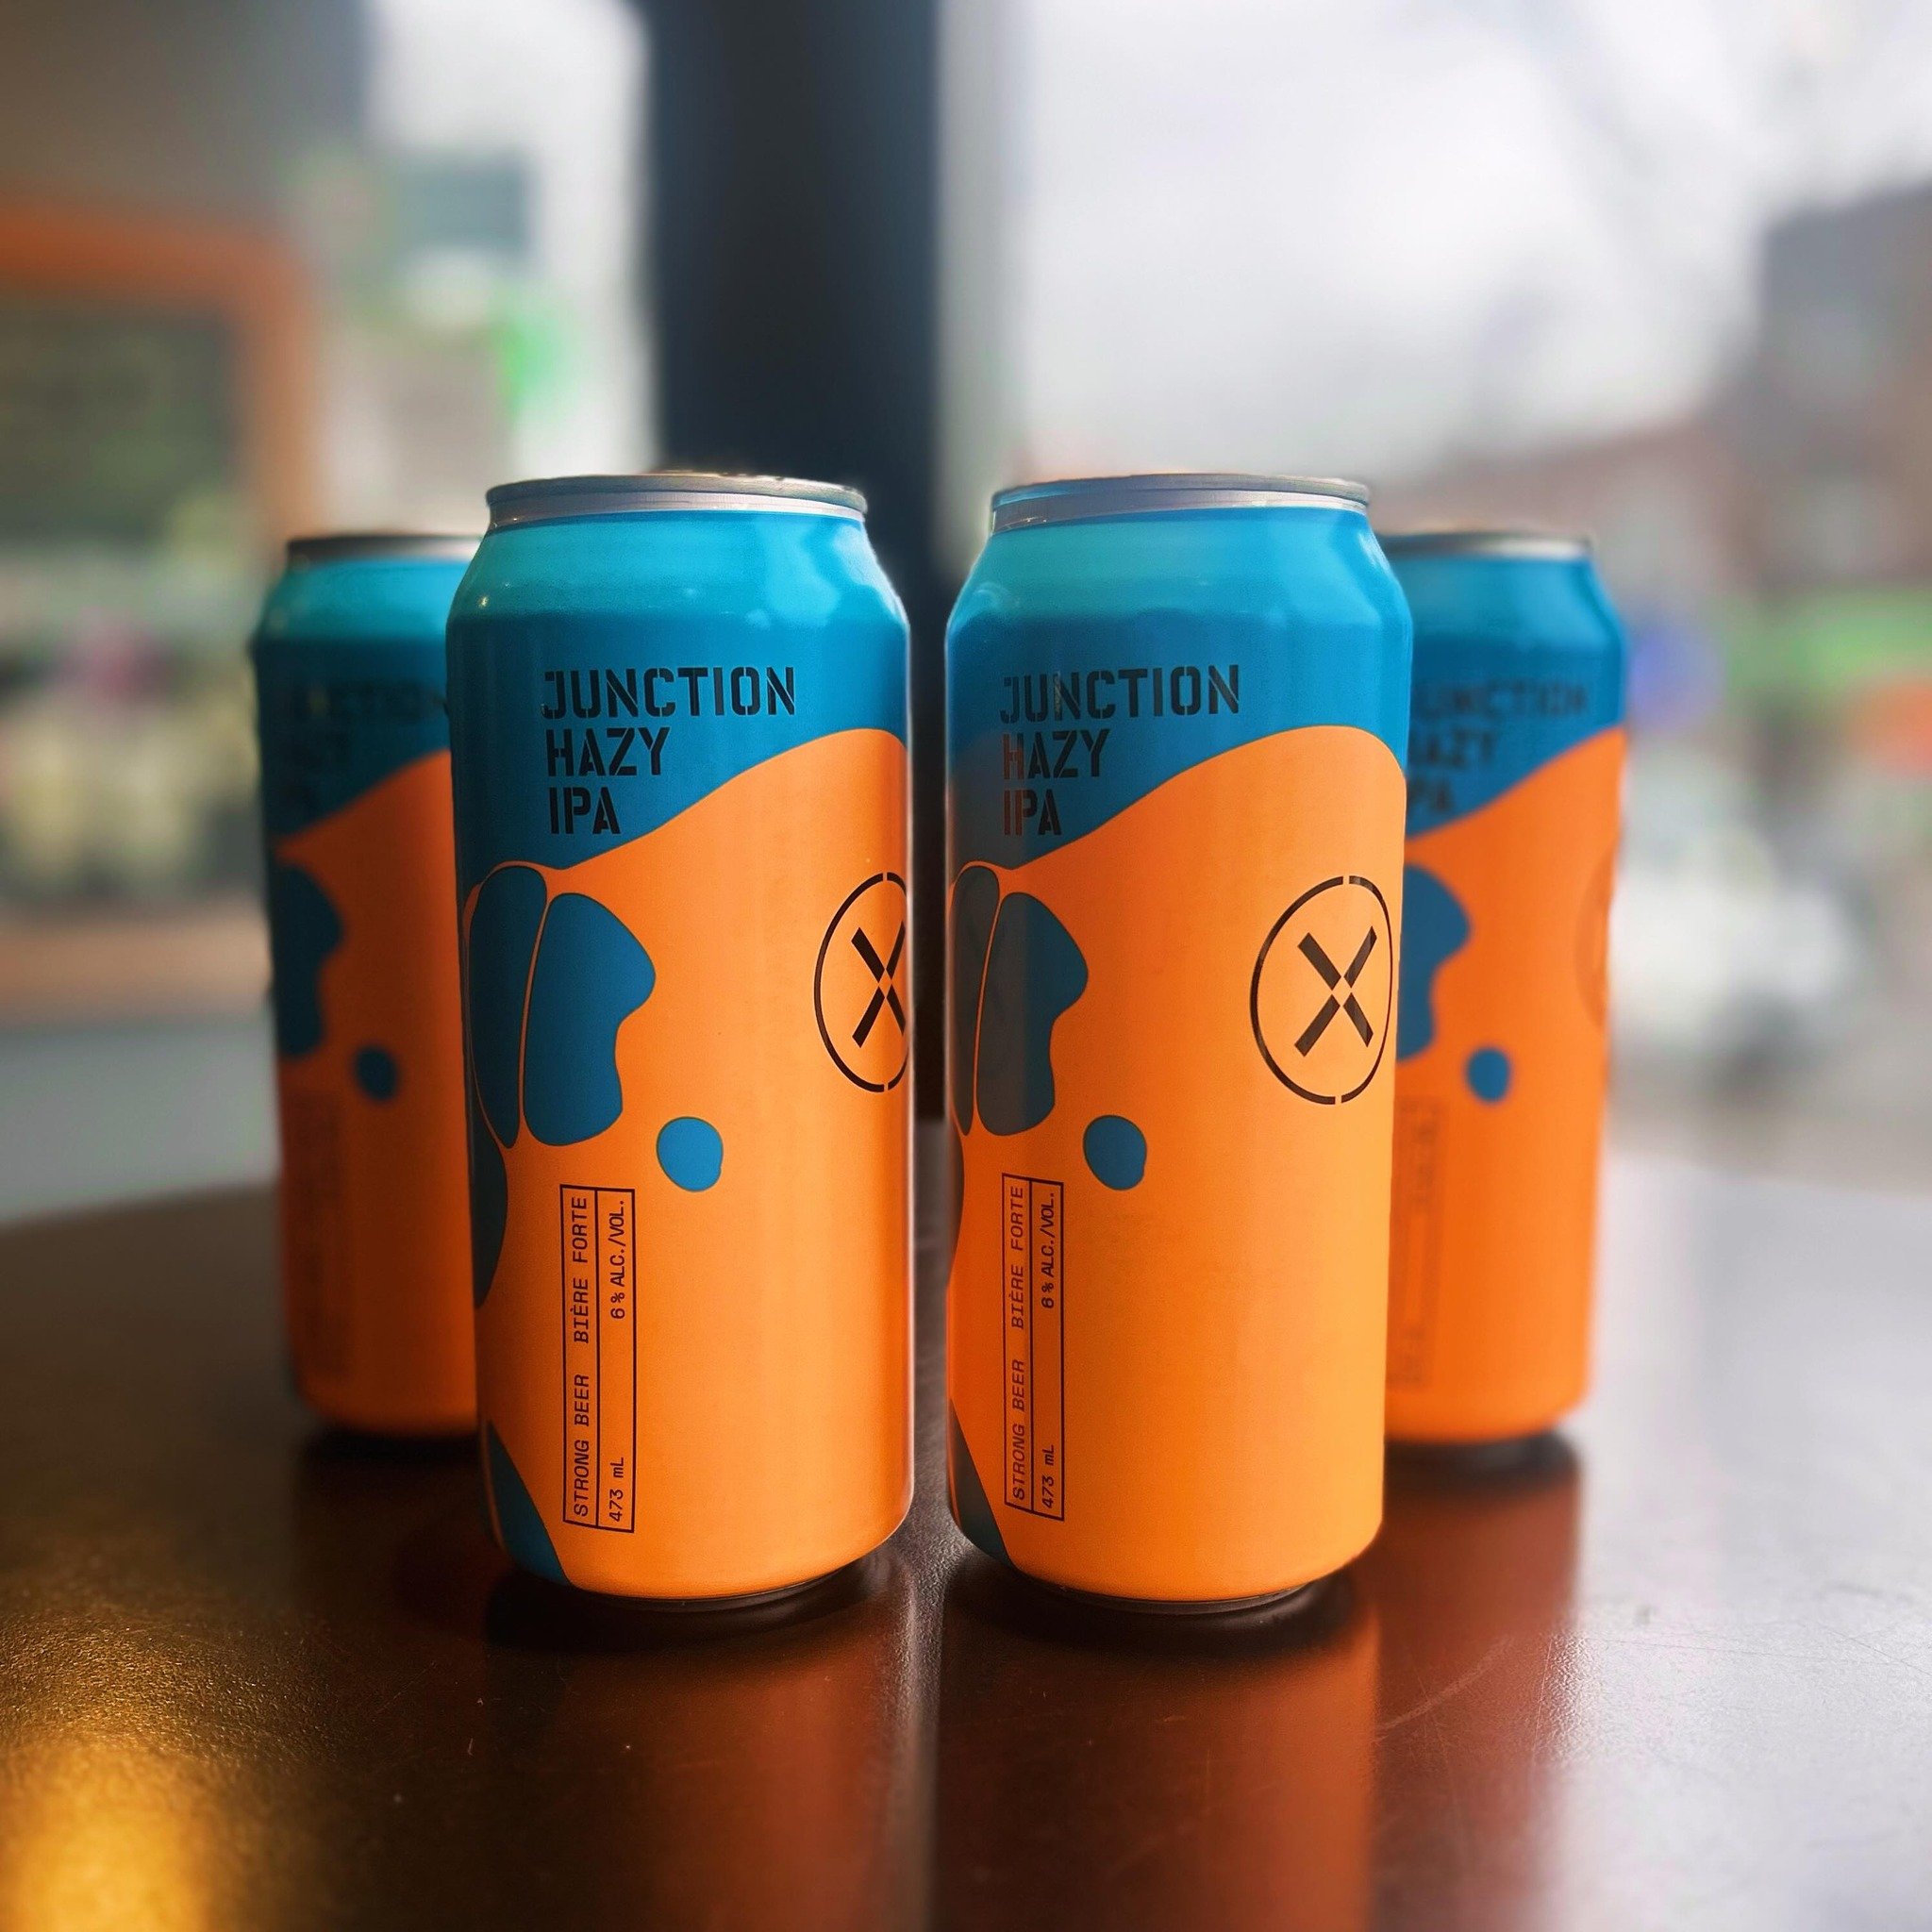 ‼️ New Tall Can ‼️

We&rsquo;ve added @junctioncraft Hazy IPA to our fridges. This medium-bodied, hoppy IPA has notes of peach, toffee and hops. Come try one today 🍻